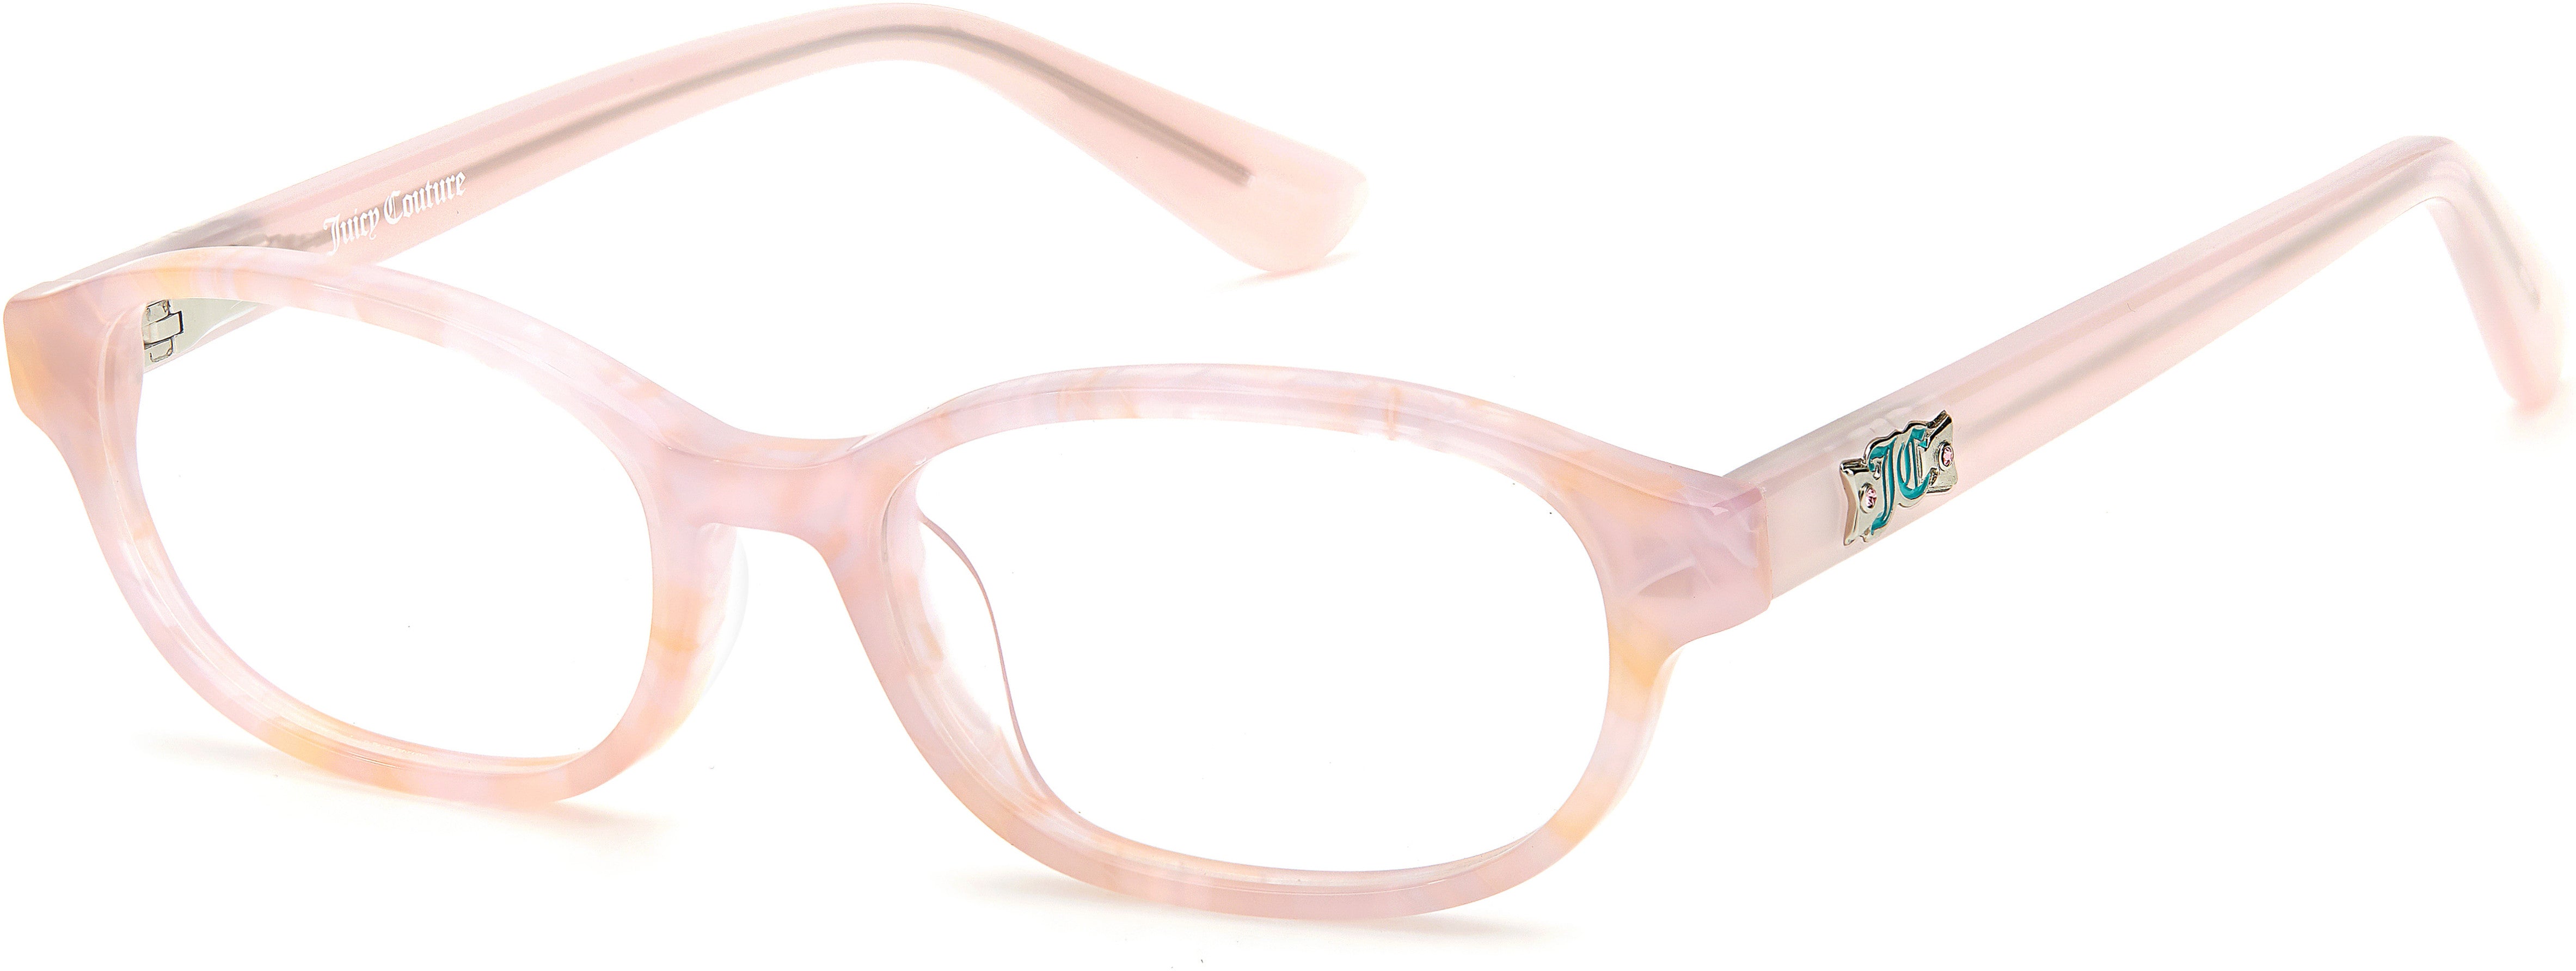 Juicy Couture Juicy 943 Oval Modified Eyeglasses 01ZX-01ZX  Pink Horn (00 Demo Lens)